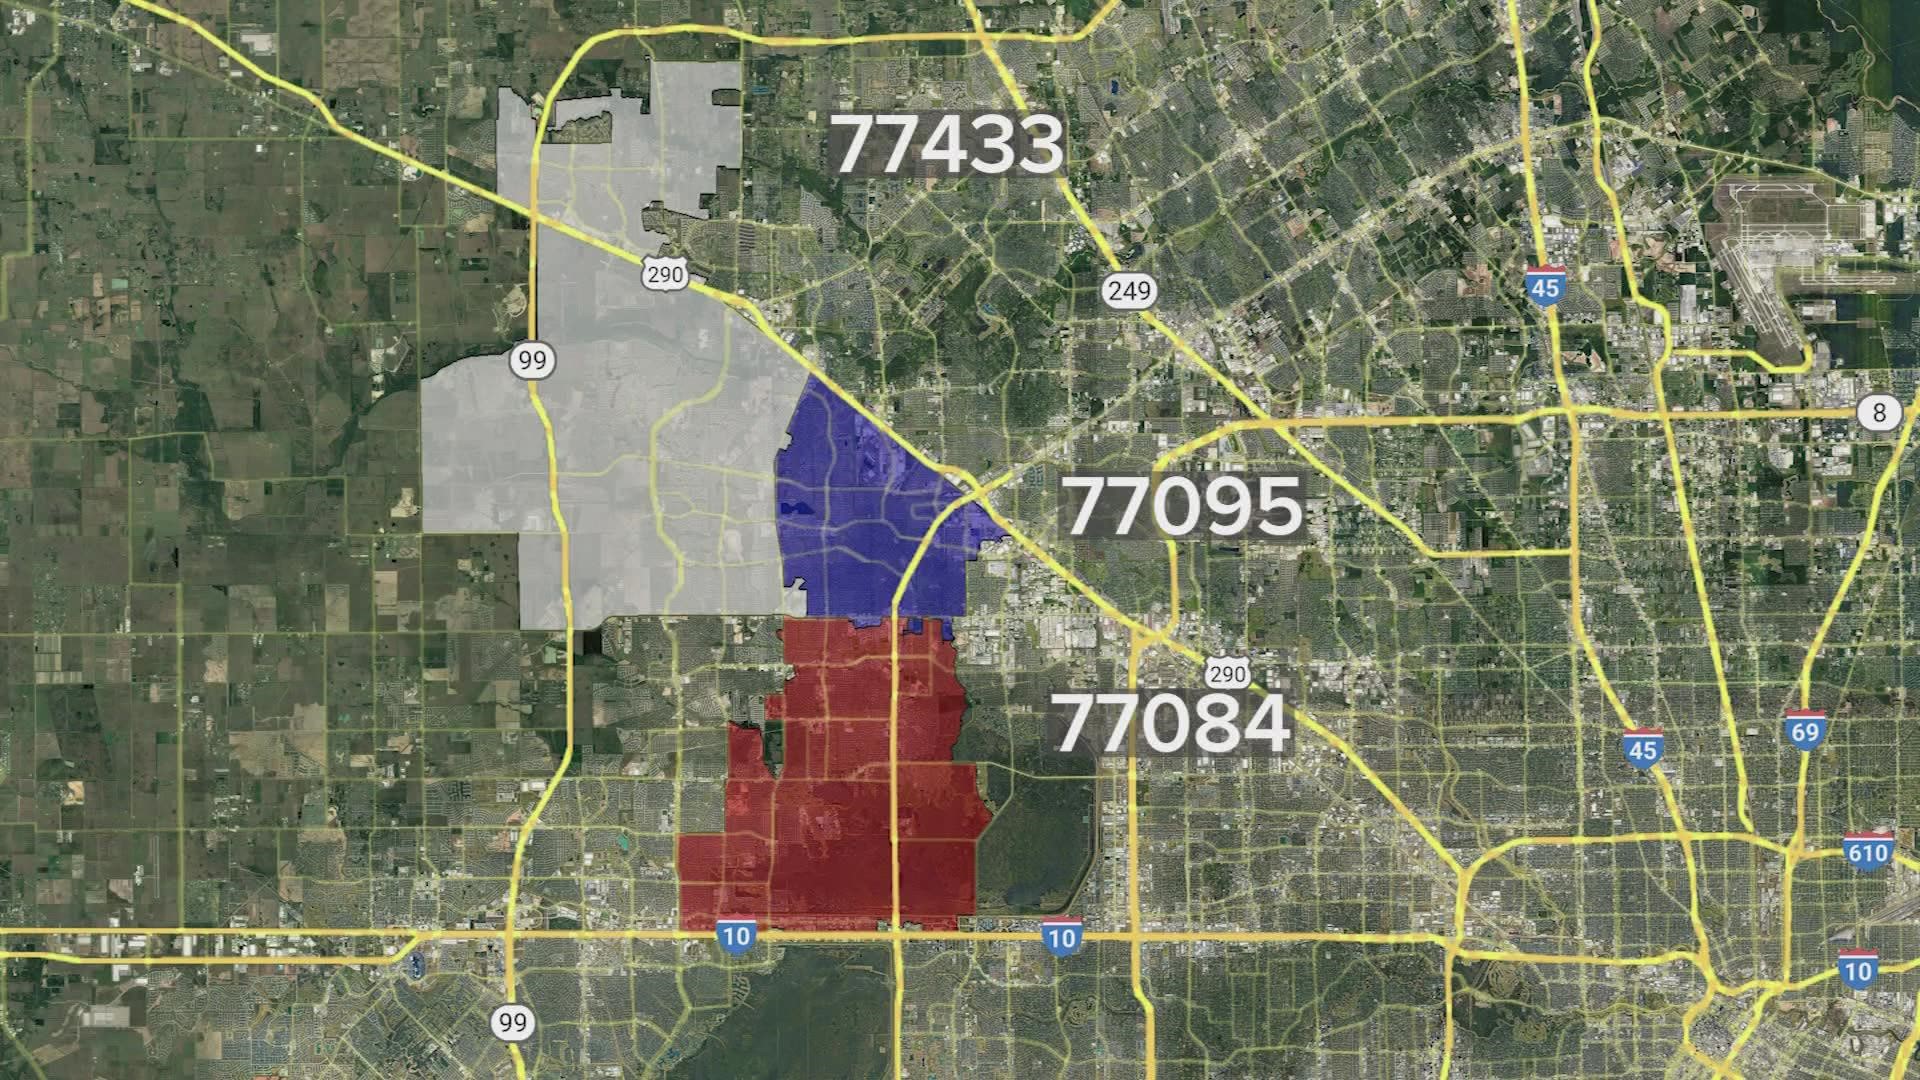 Residents in northwest Harris County are fed up with the constant power outages.